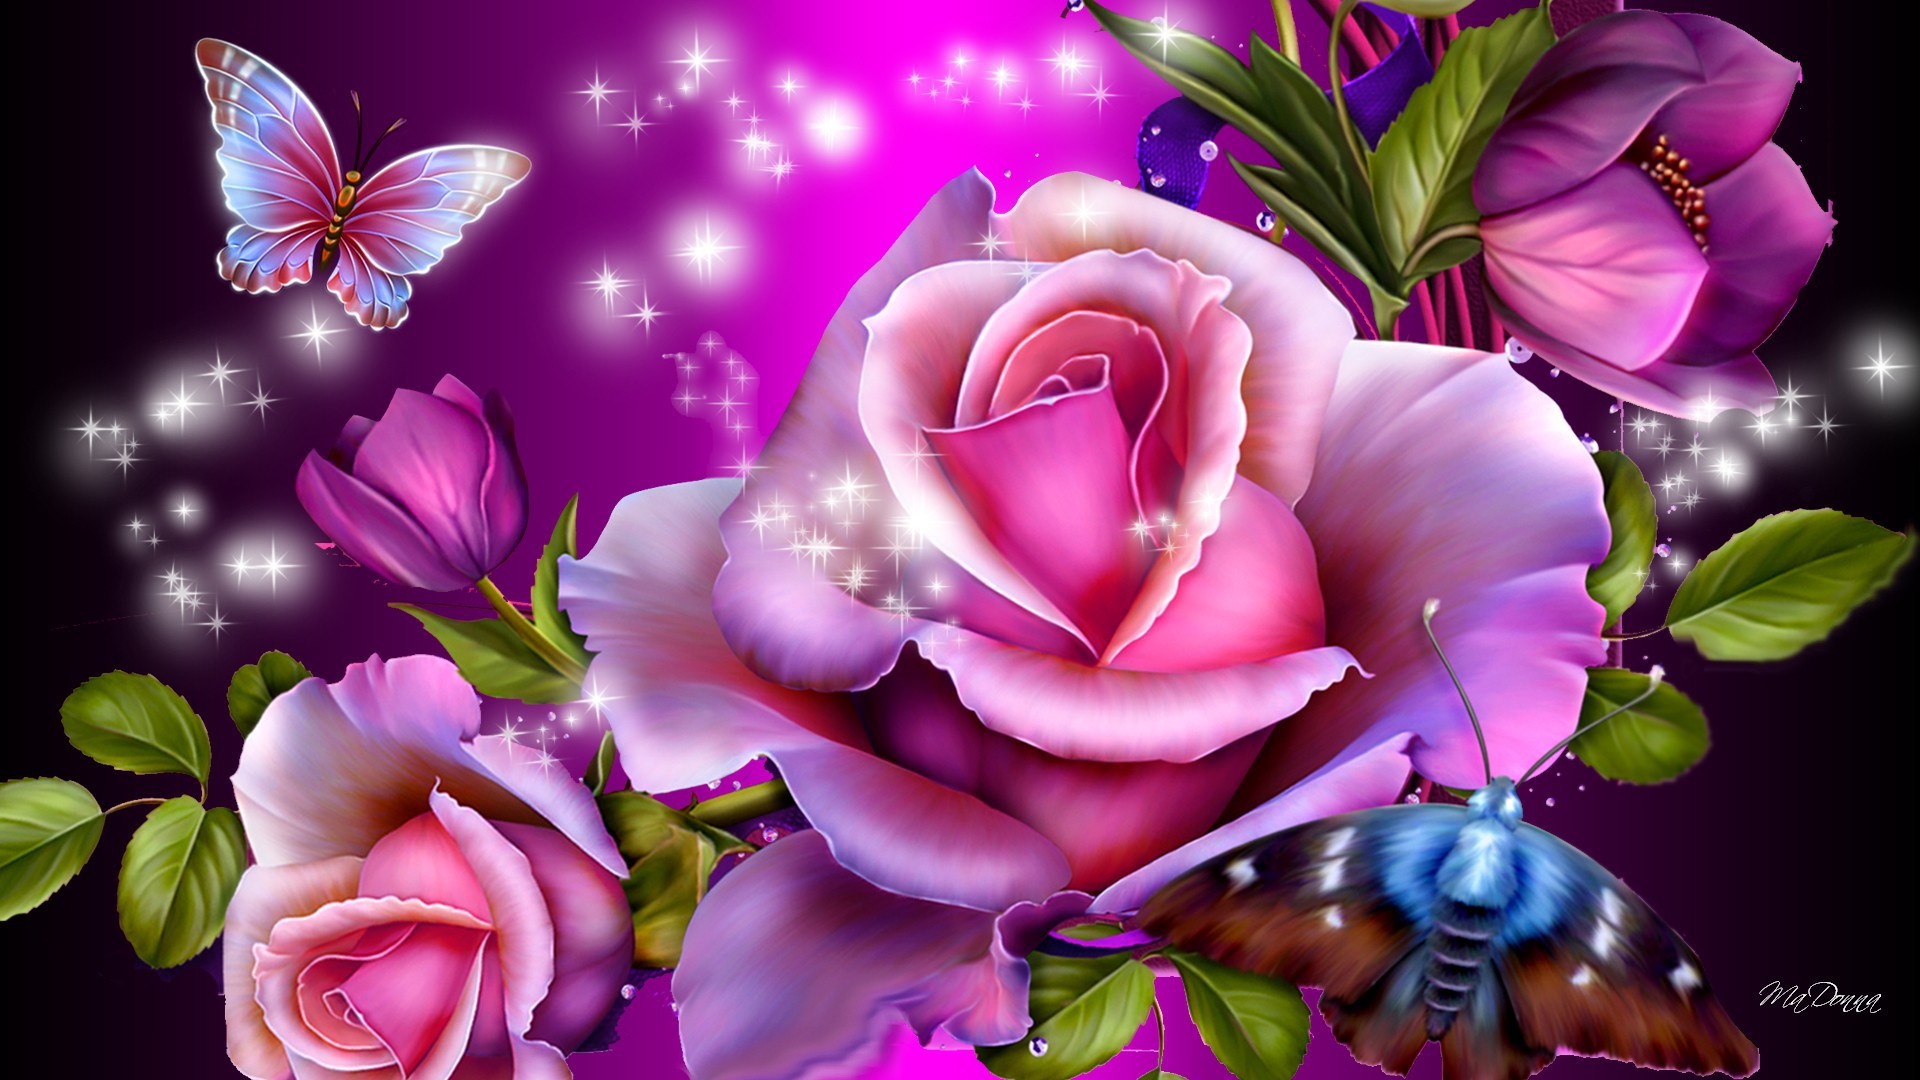 Flowers on Pinterest Pink Flowers, Purple Roses and Flower Wallpaper Roses Arent Always Thorny Pinterest Flower wallpaper, Purple roses and other